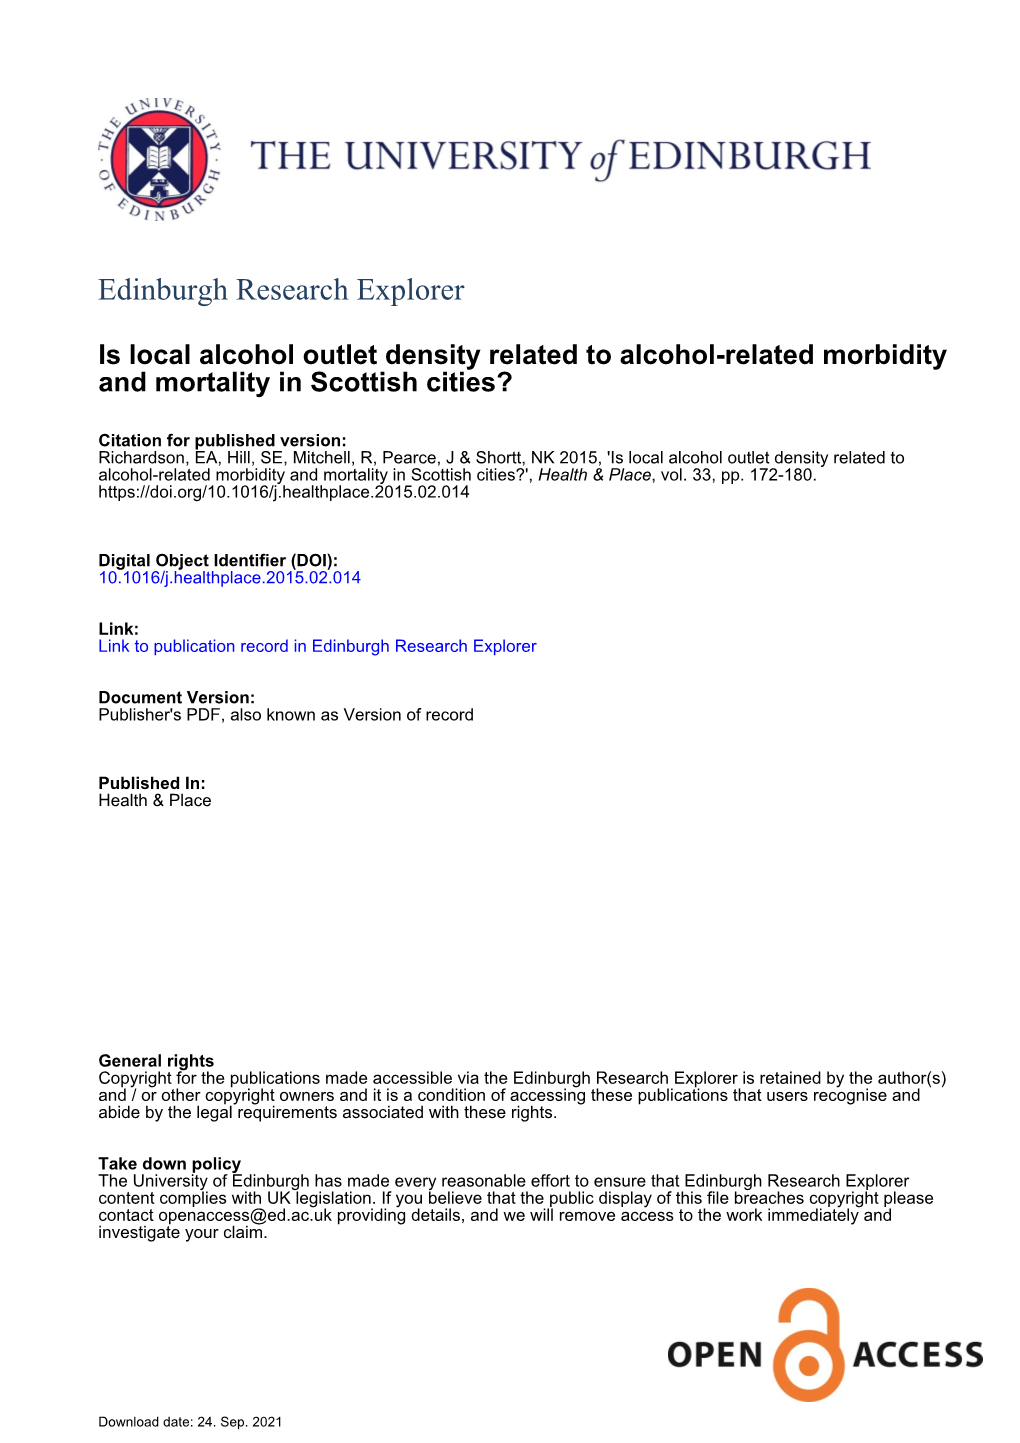 Is Local Alcohol Outlet Density Related to Alcohol-Related Morbidity and Mortality in Scottish Cities?